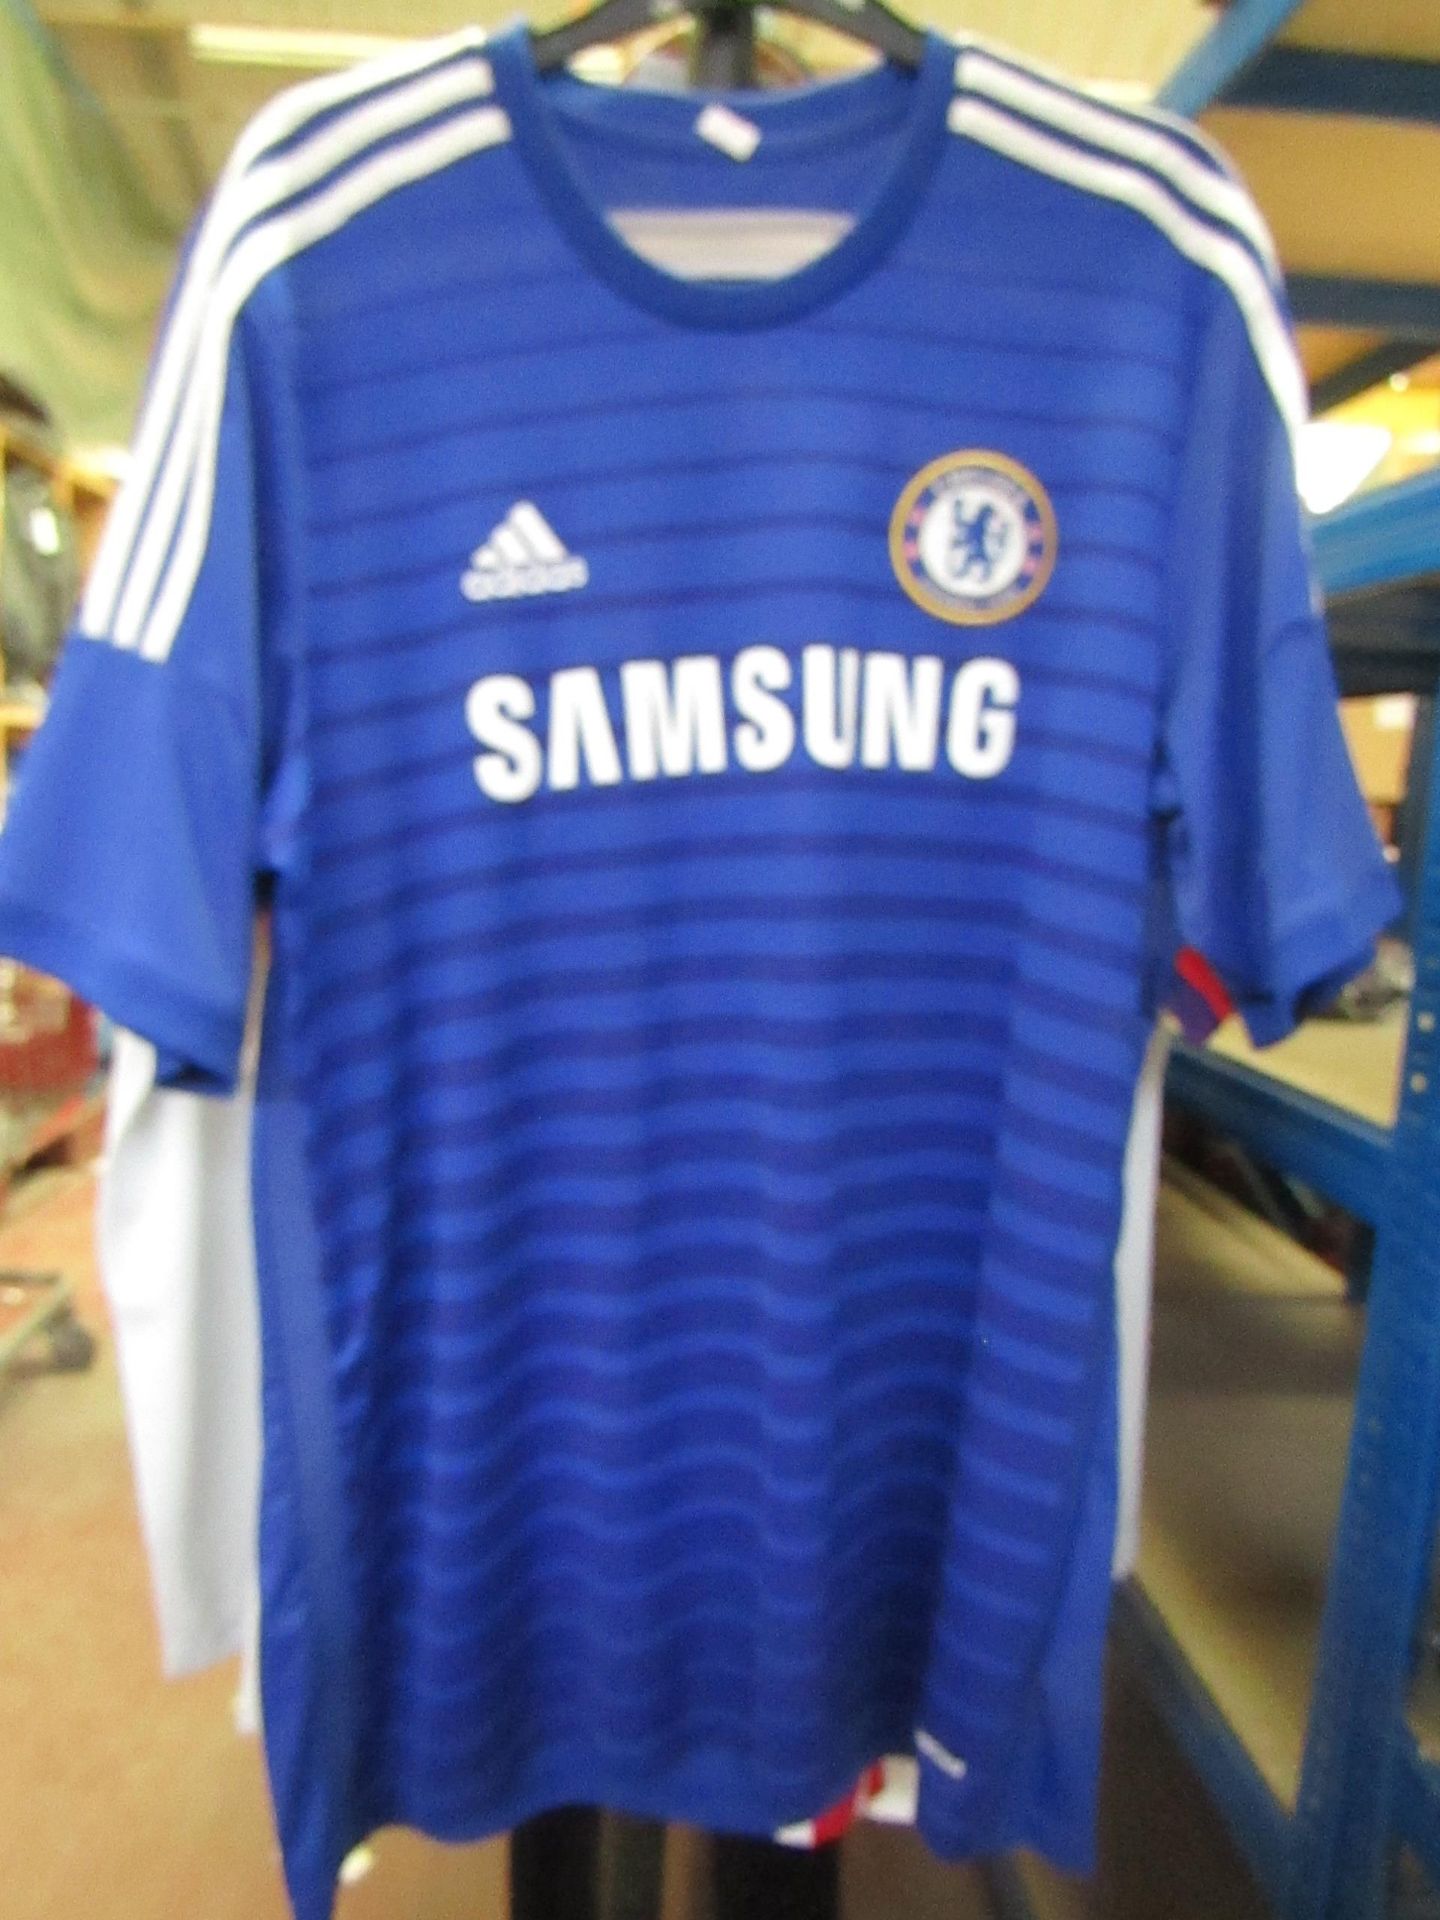 Chelsea Official Adidas Football Shirt size XL see image